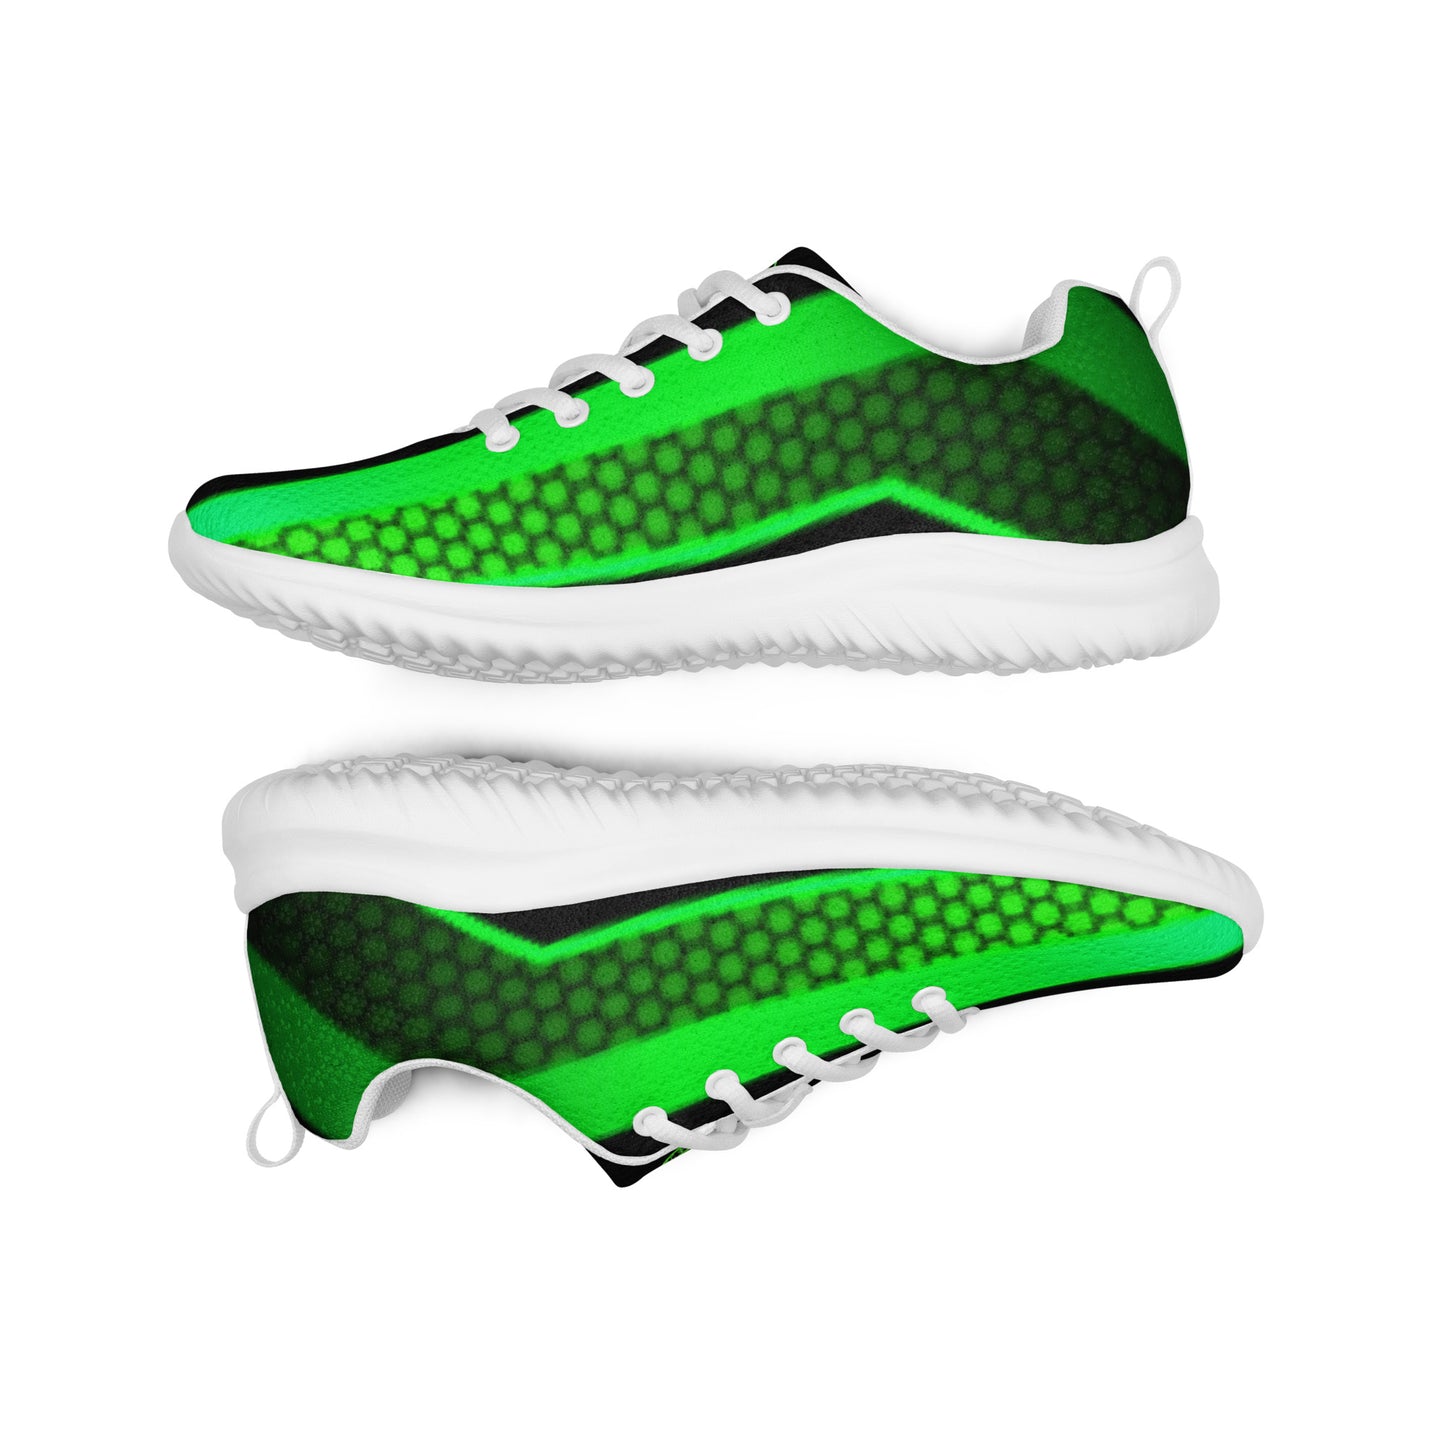 Men’s athletic shoes,Strong Fitness